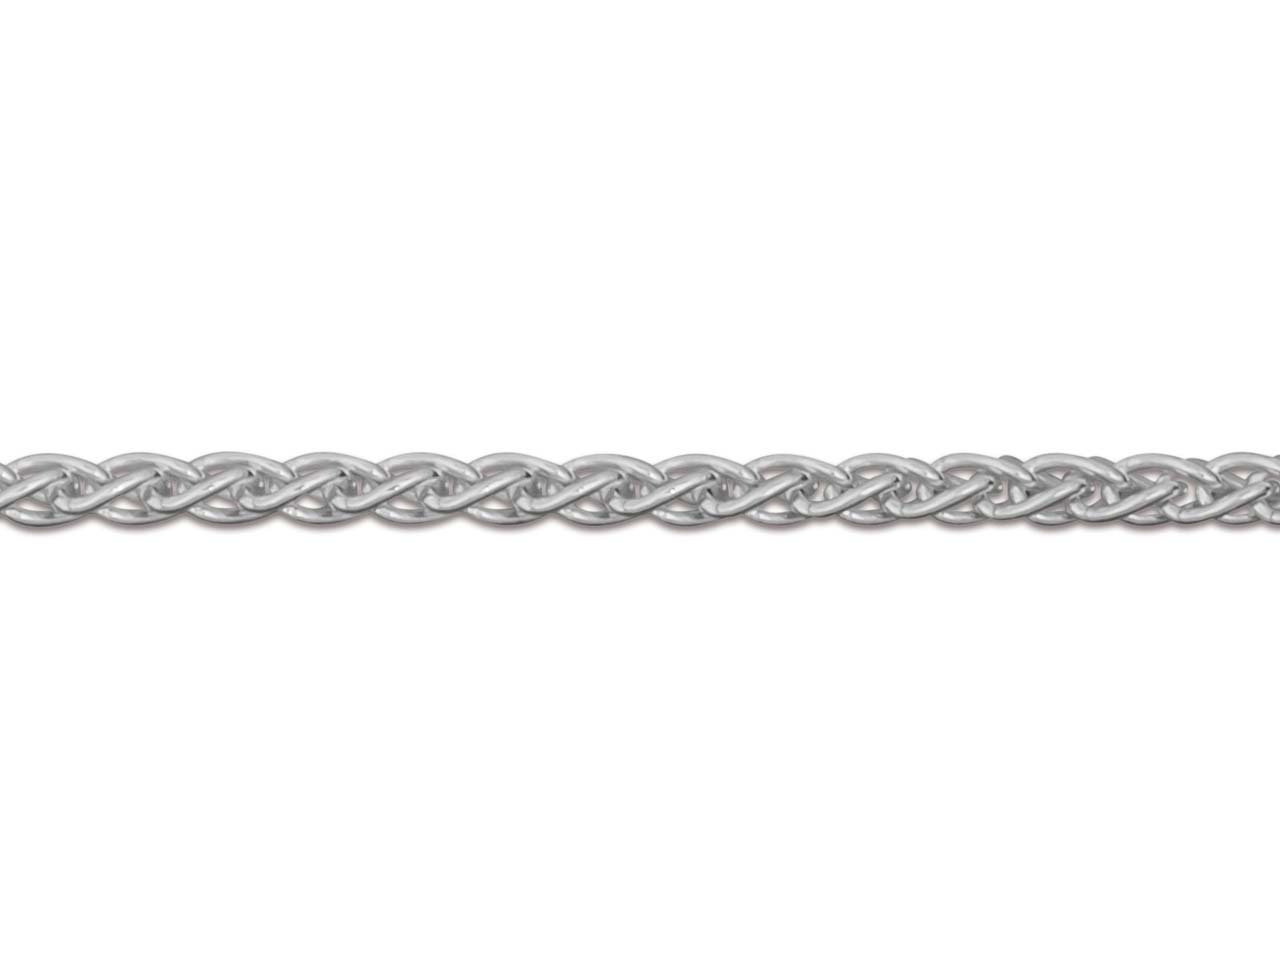 Italian Sterling Silver 3mm thick Snake Chain with Lobster Clasp in 2 lengths.